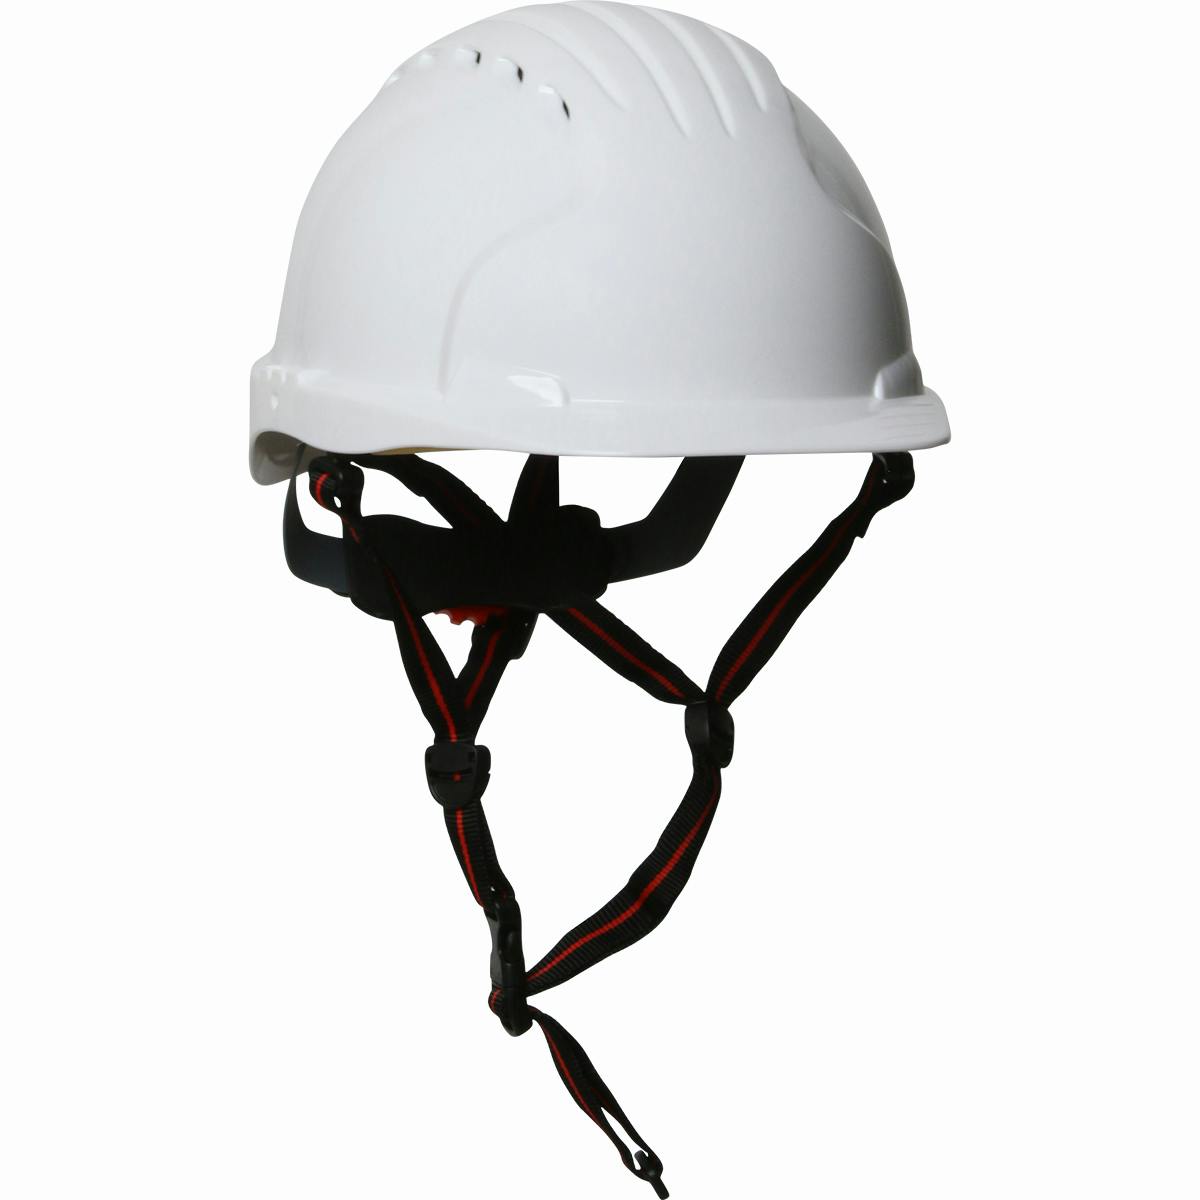 EVO® 6151 Ascend™ Vented, Cap Style Safety Helmet with HDPE Shell, 4-Point Chinstrap, 6-Point Suspension and Wheel Ratchet Adjustment (280-EV6151V-CH)